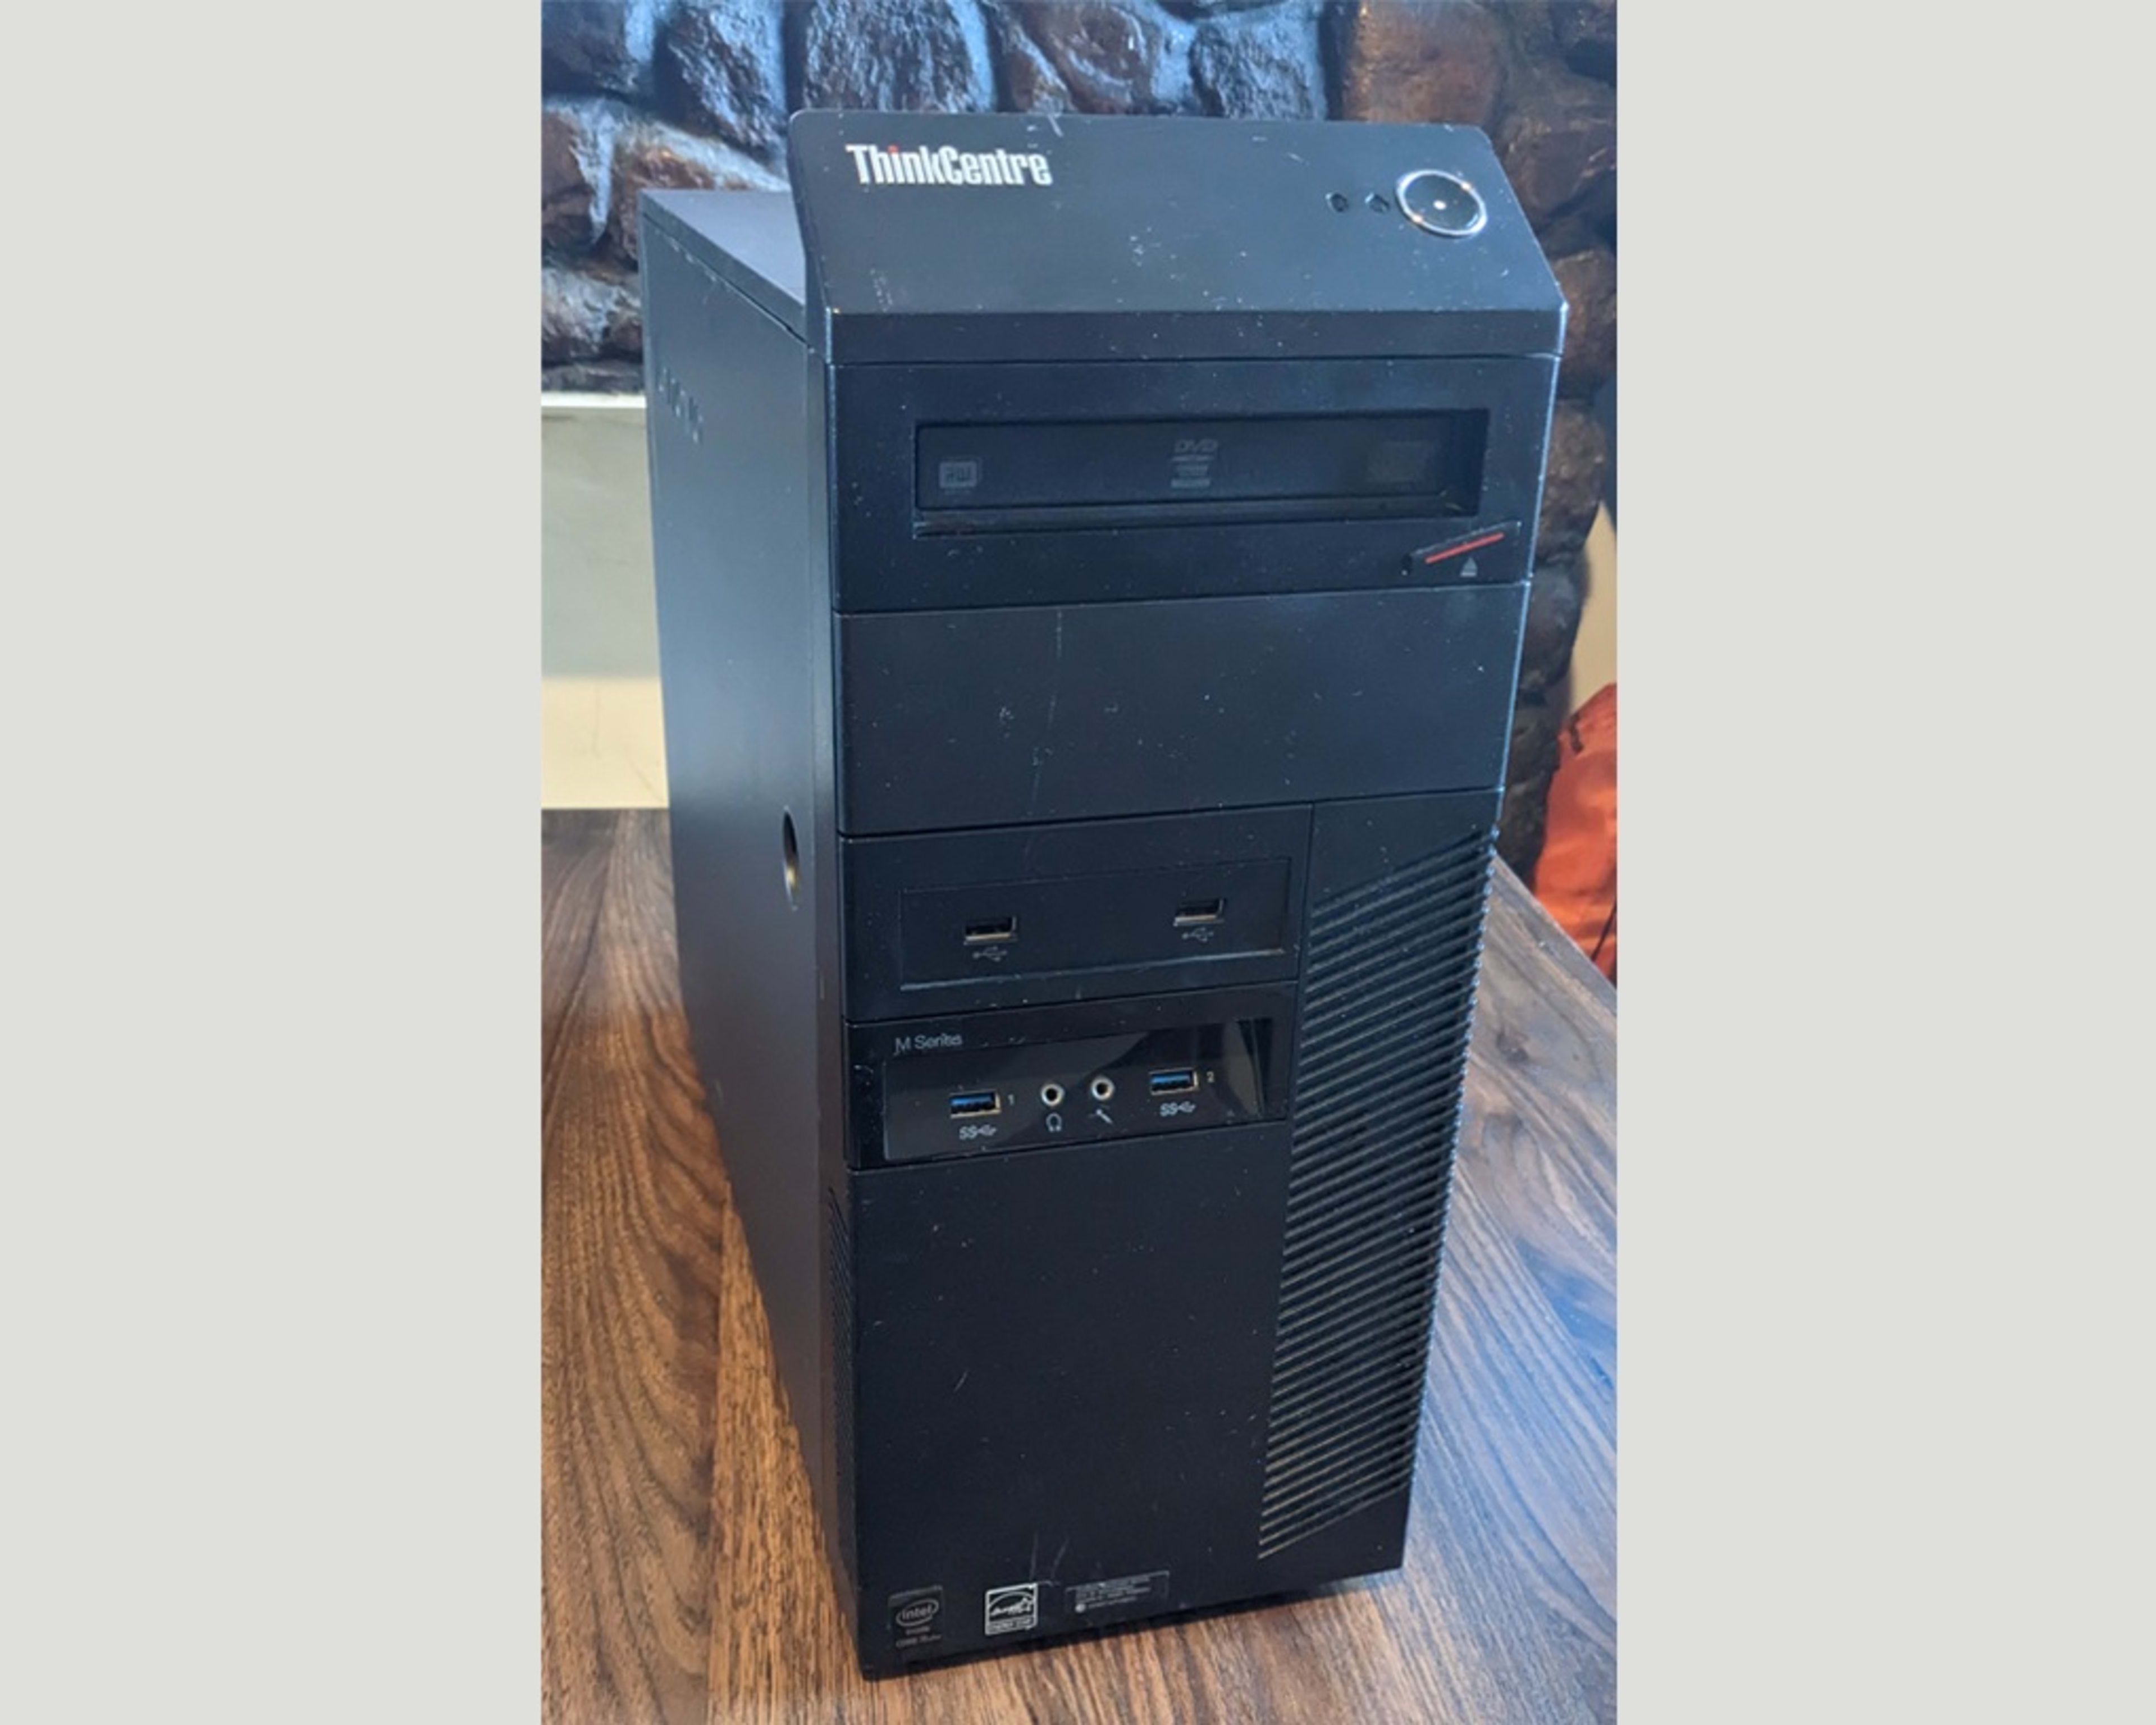 1080p Entry Level Gaming PC, Refurbished Mid Tower